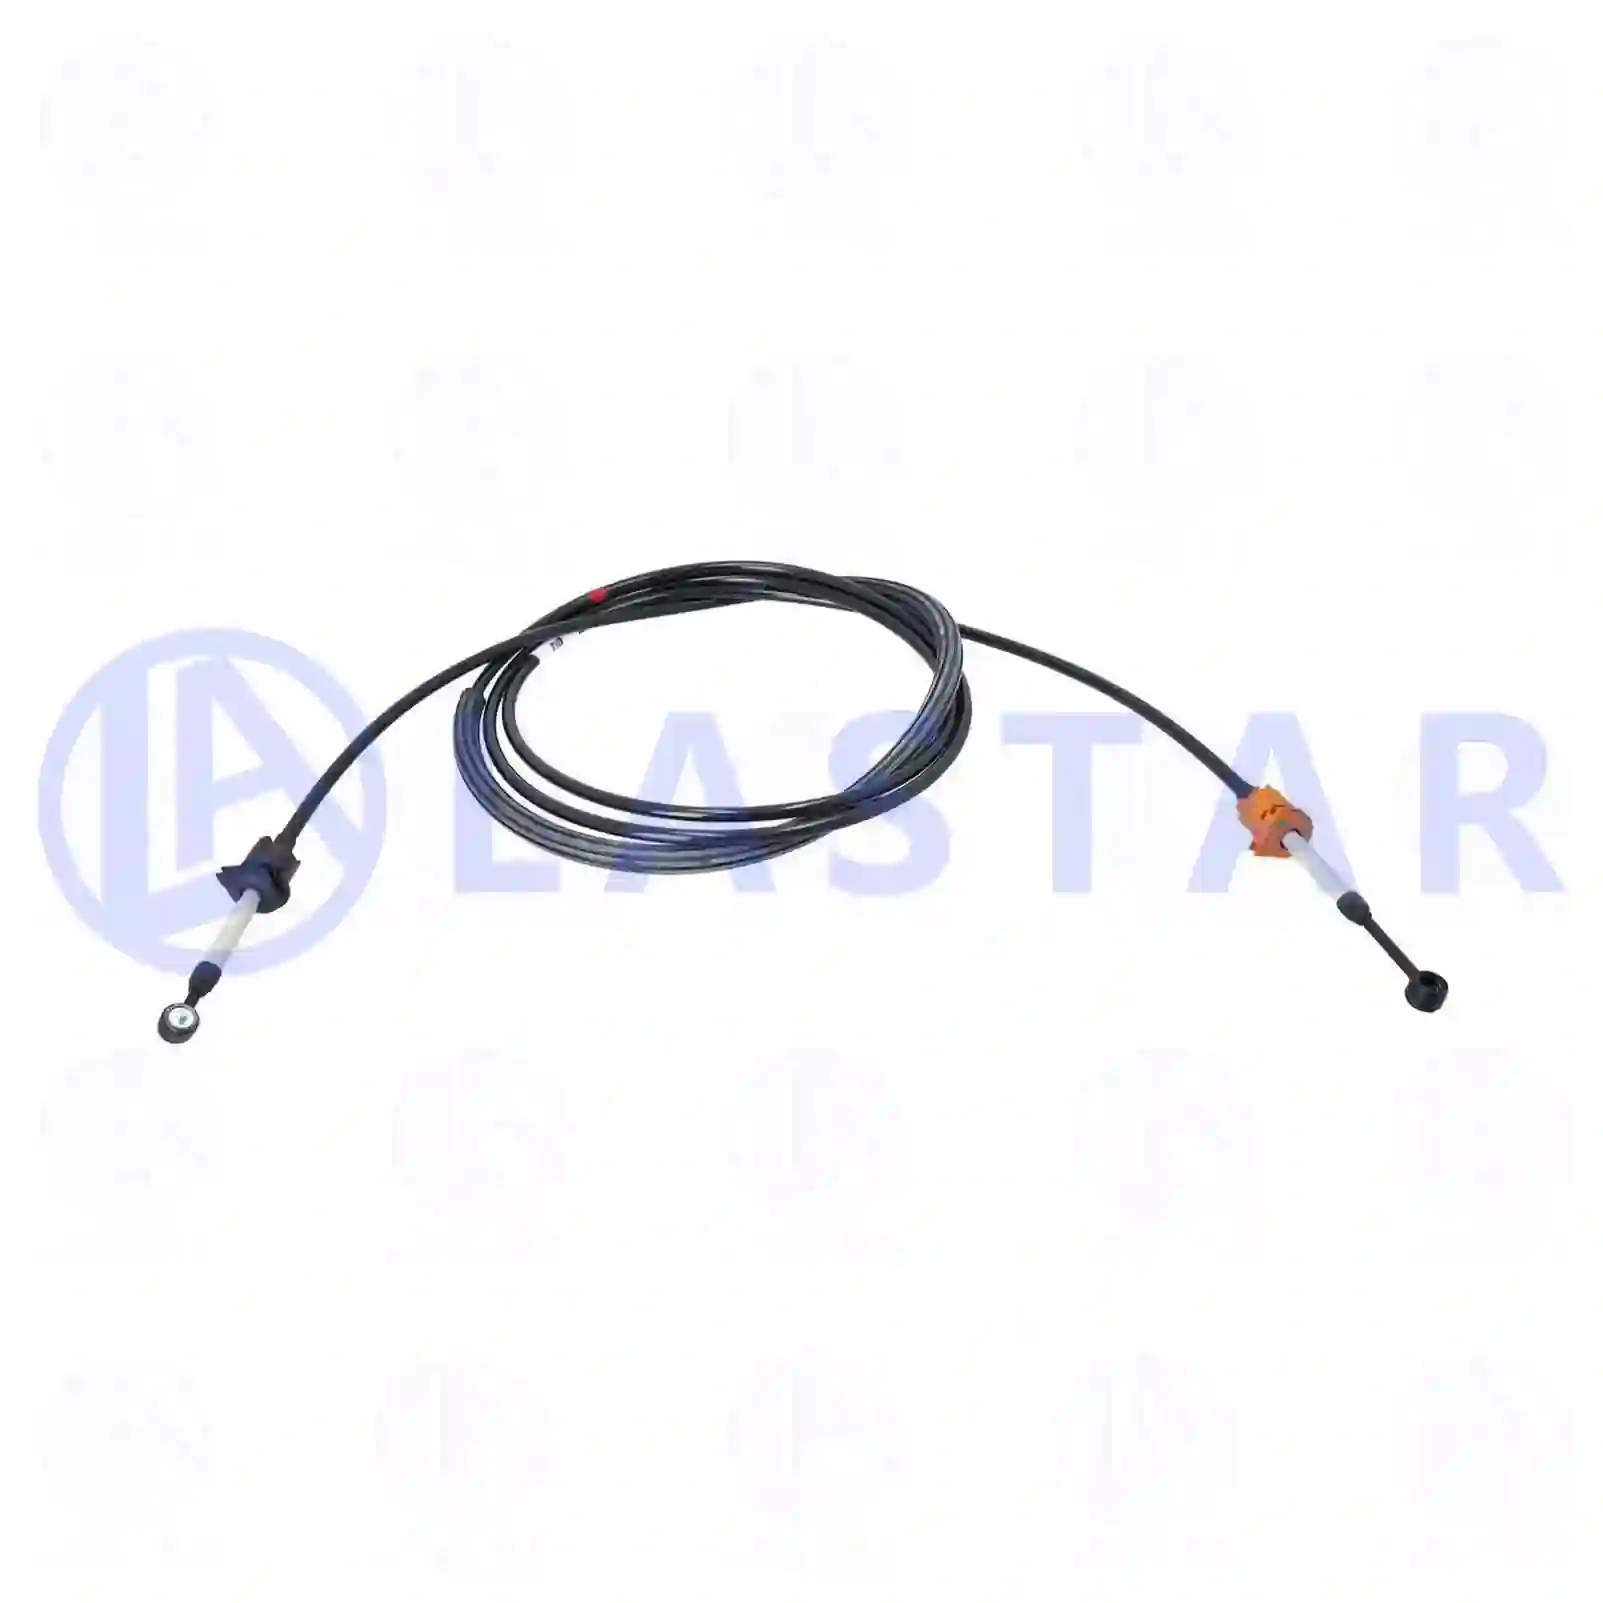 Control cable, switching, 77732688, 21002886, 2178971 ||  77732688 Lastar Spare Part | Truck Spare Parts, Auotomotive Spare Parts Control cable, switching, 77732688, 21002886, 2178971 ||  77732688 Lastar Spare Part | Truck Spare Parts, Auotomotive Spare Parts